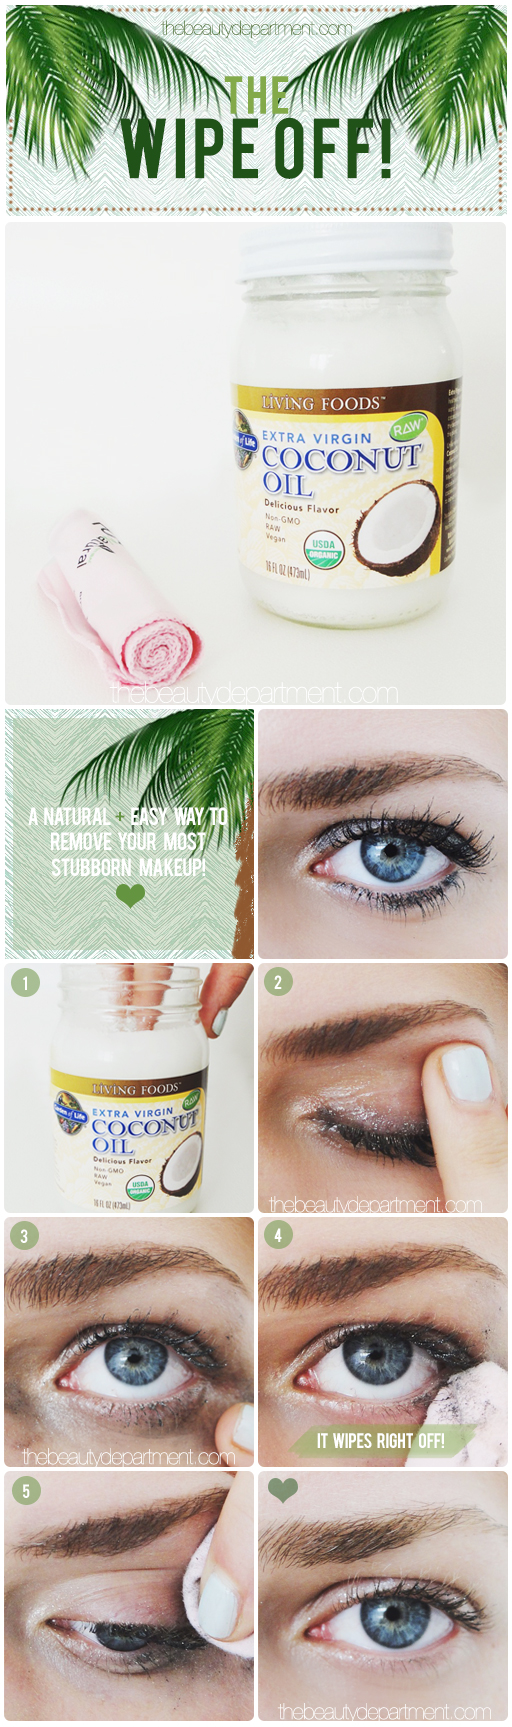 How to make eye makeup remover at home